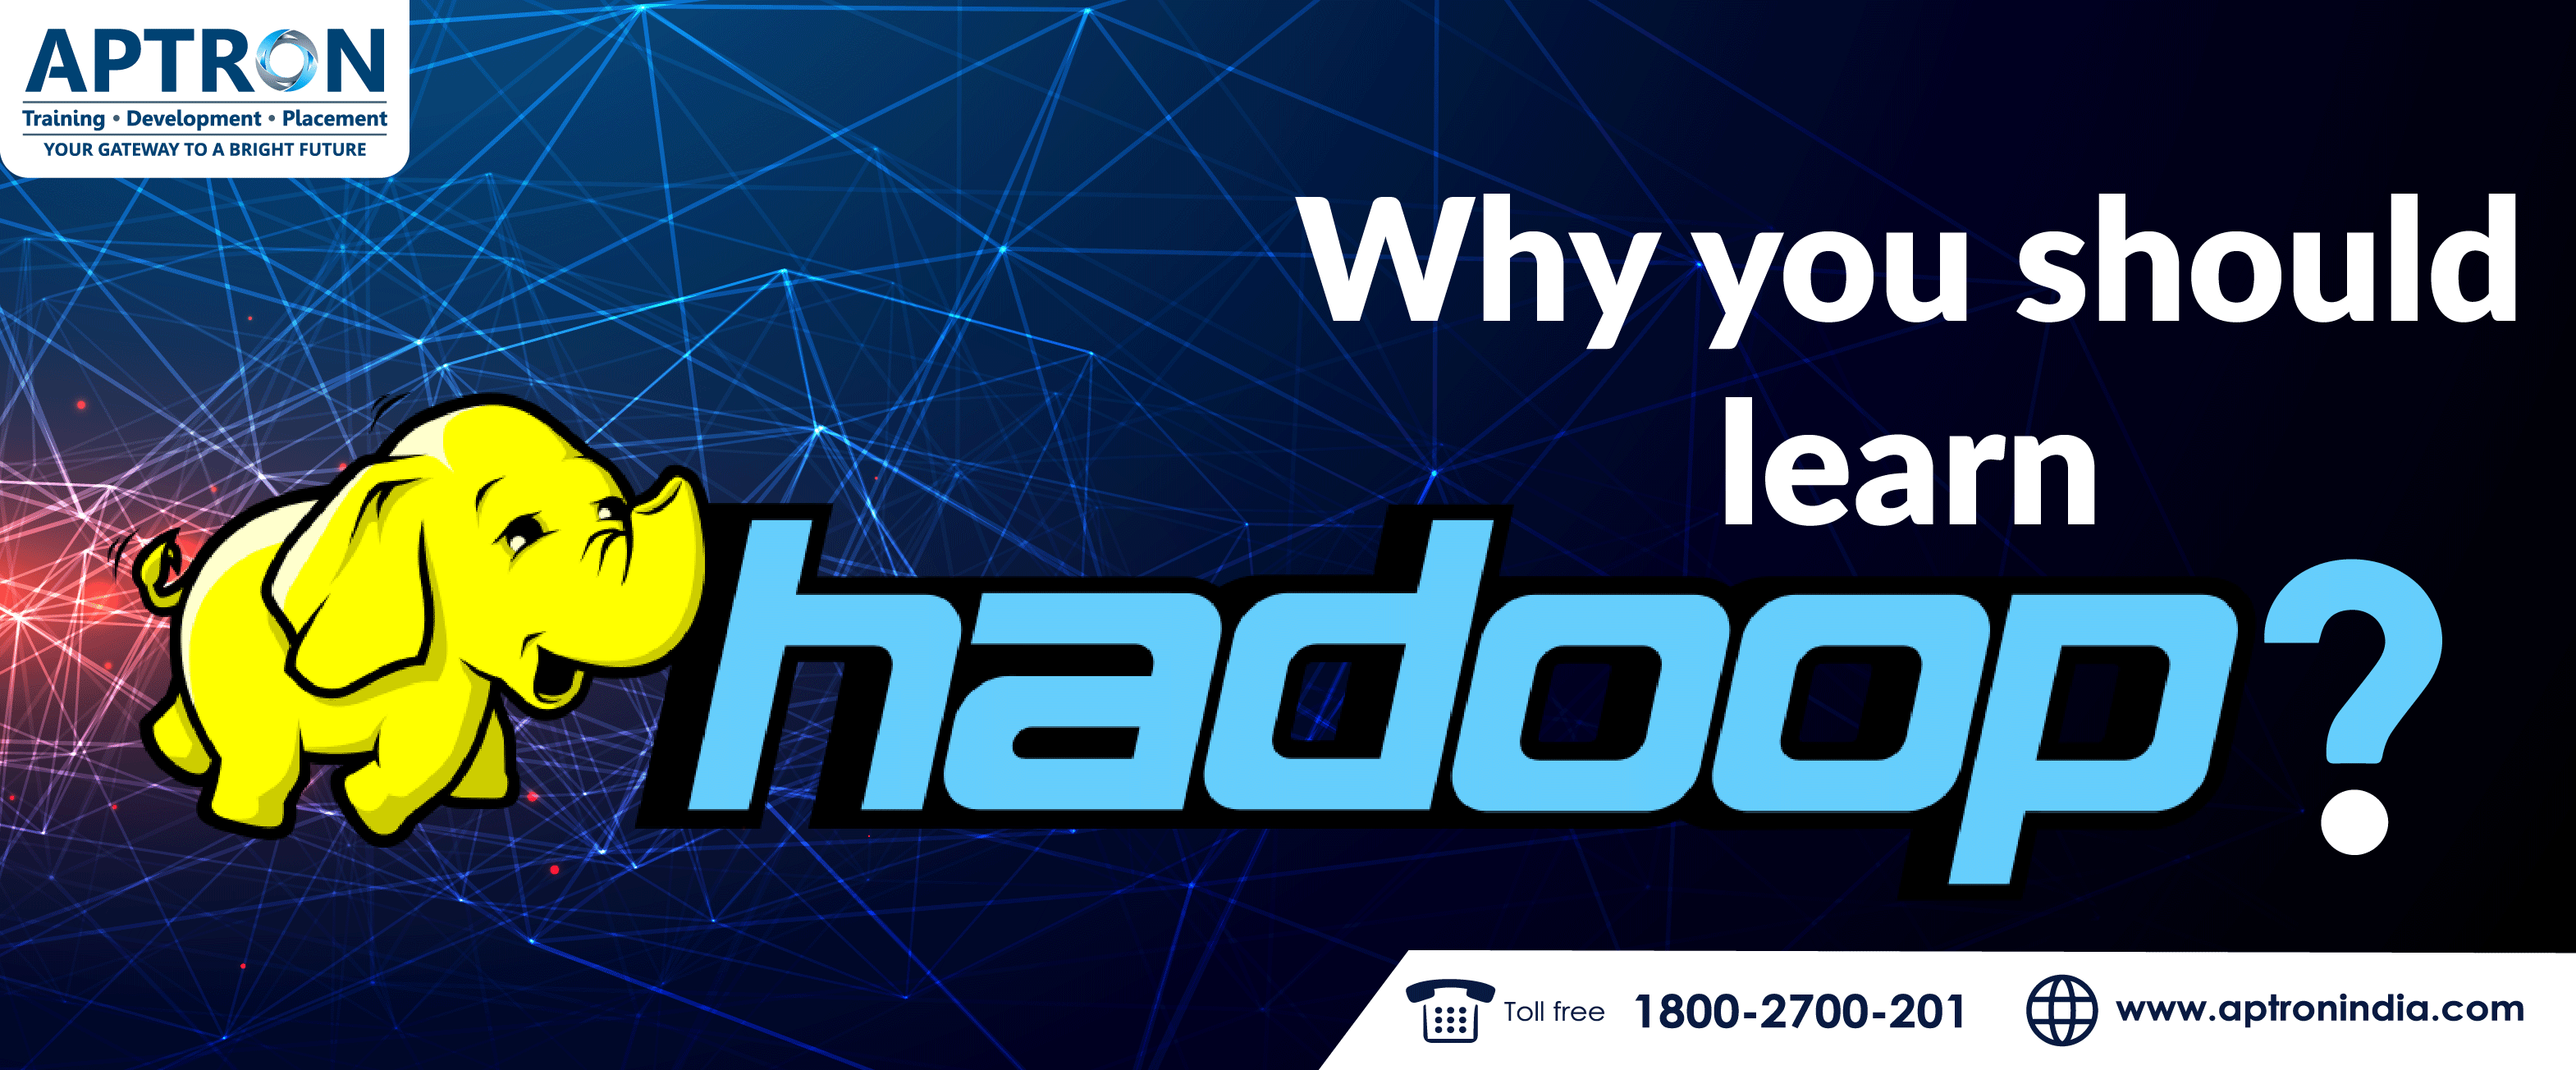 Why you should learn Hadoop?